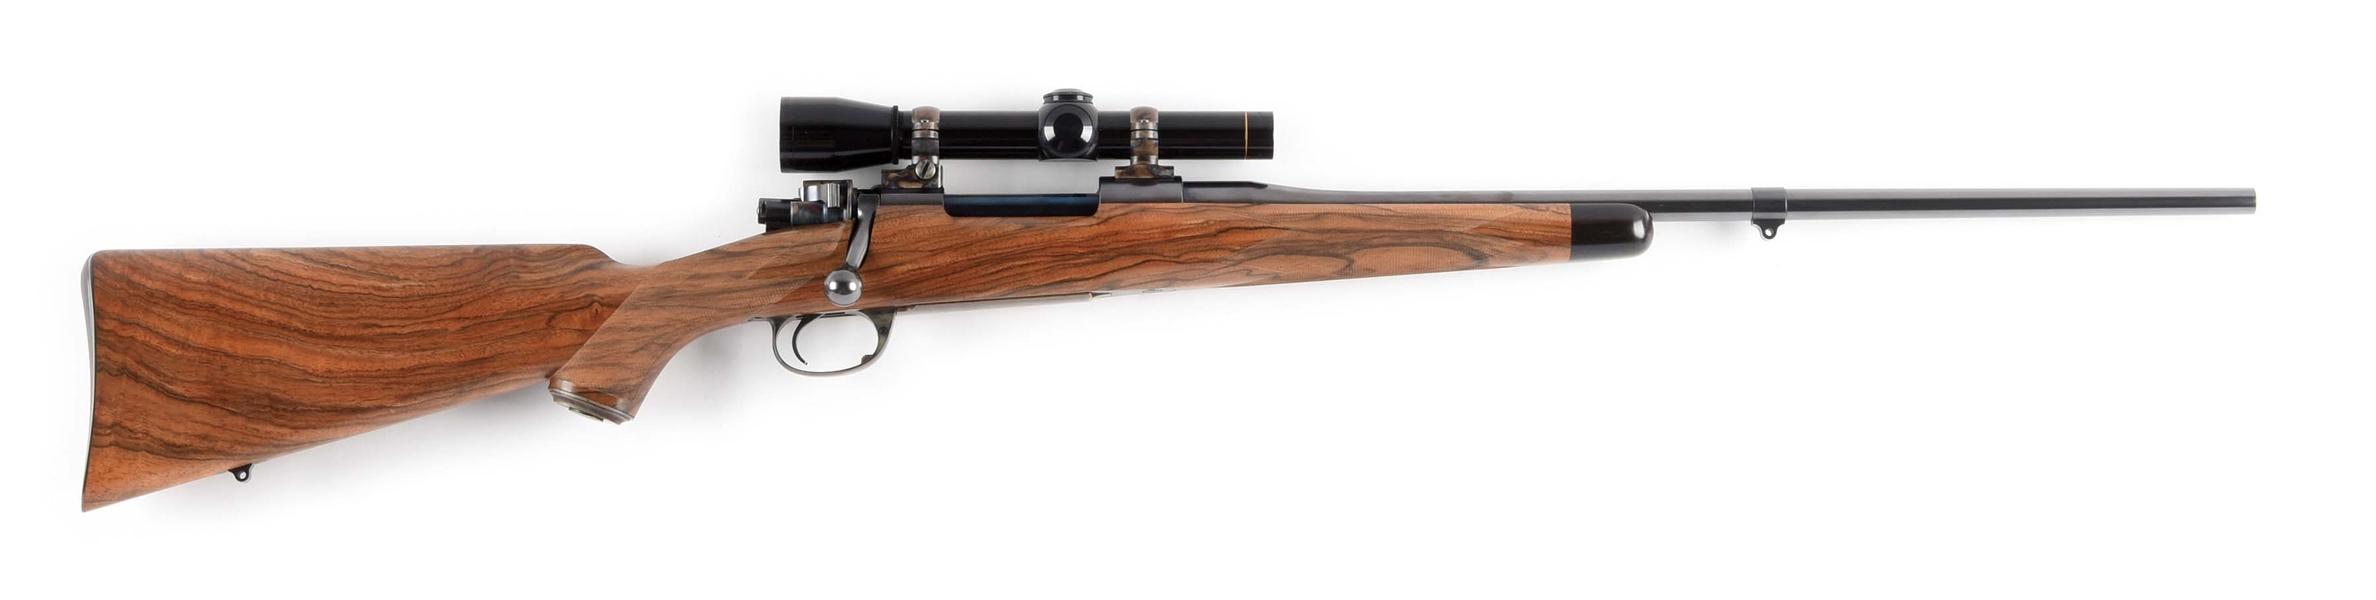 (M) FINELY APPOINTED MAUSER CUSTOM RIFLE BY STEPHEN L. BILLEB WITH SCOPE.